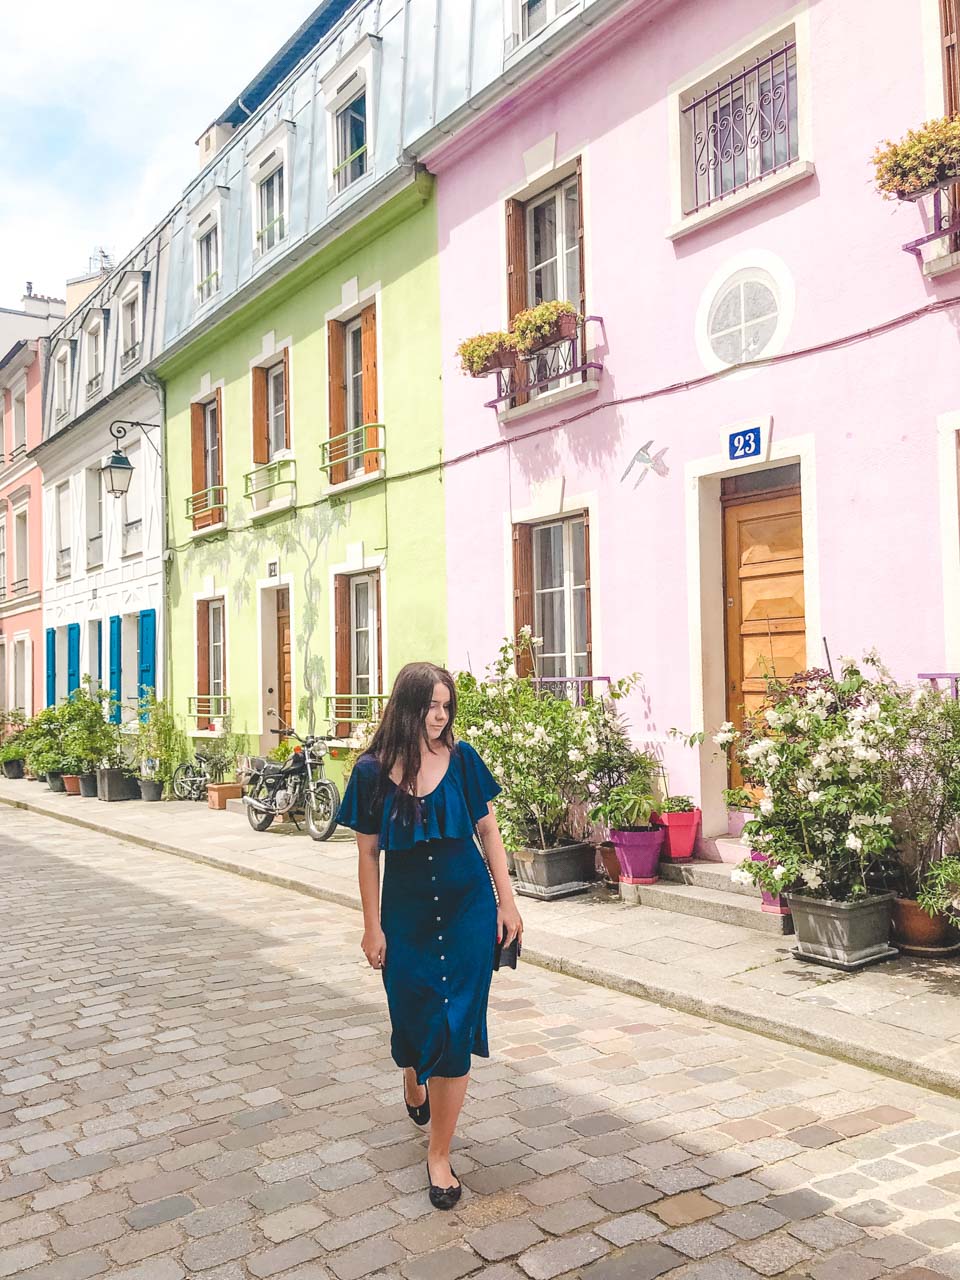 Young dark-haired woman in a blue off-the-shoulder dress walking on Rue Crémieux in Paris, France